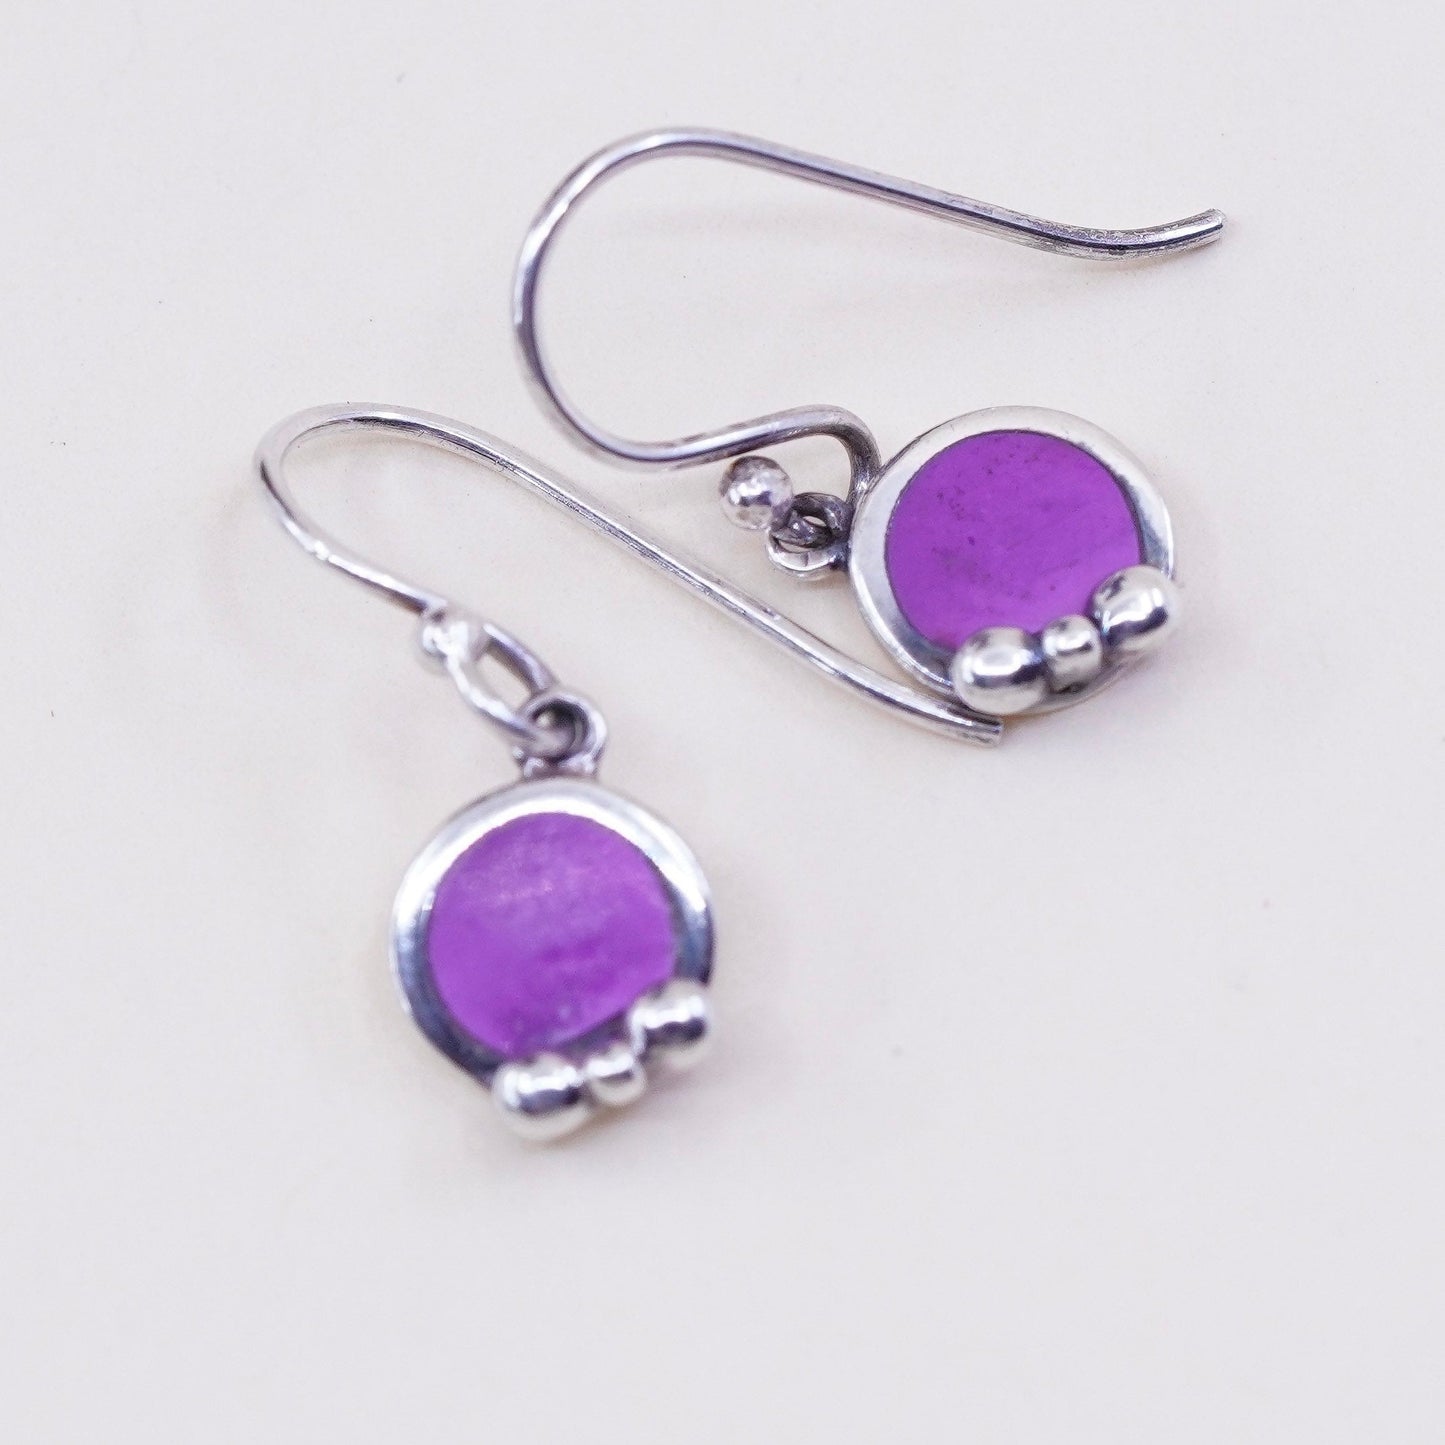 Vintage sterling 925 silver handmade earrings with purple howlite and beads